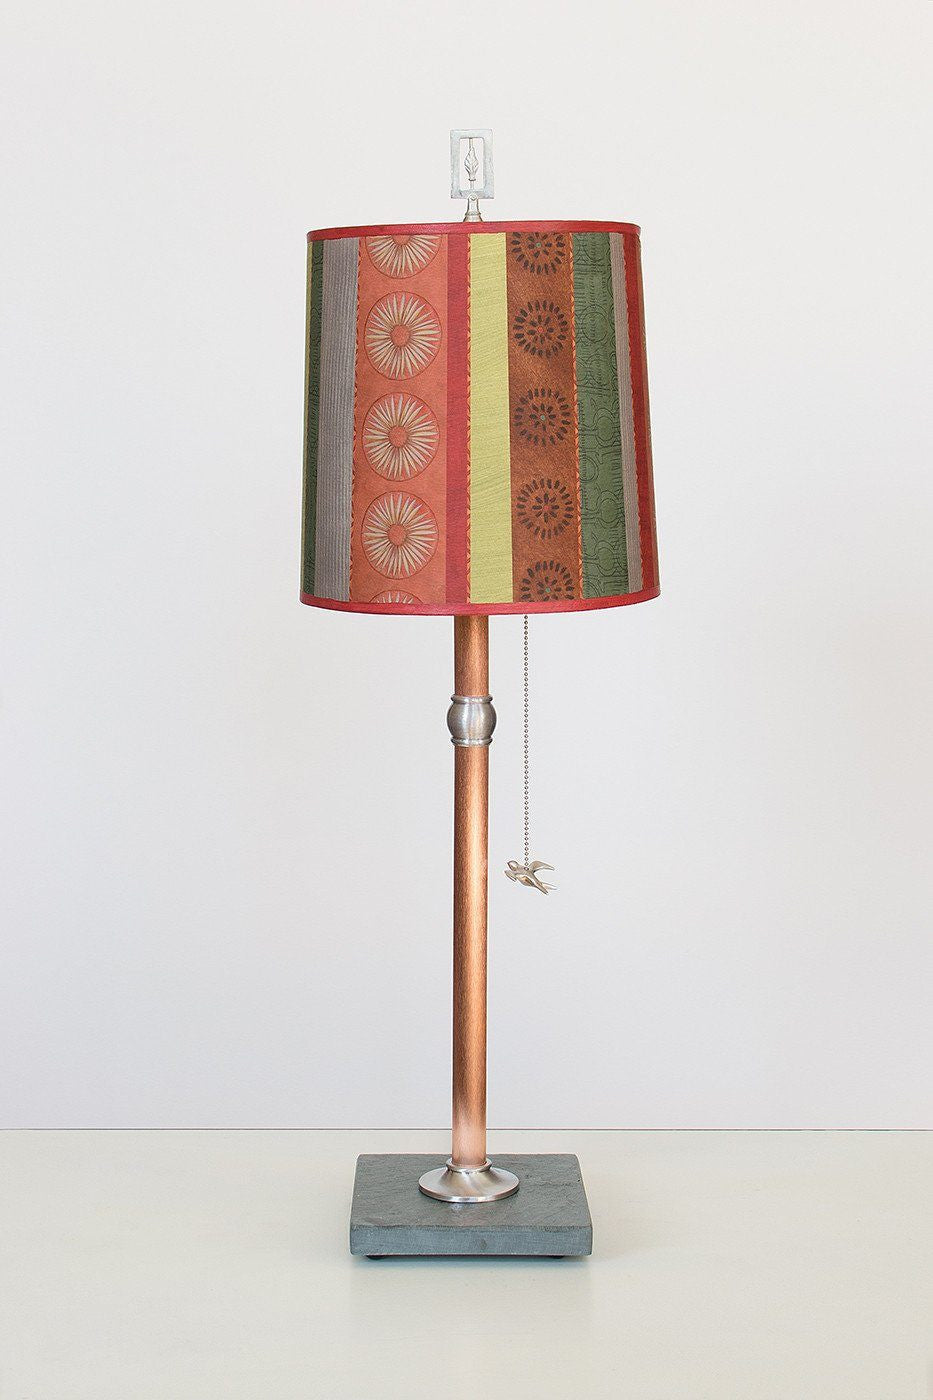 Janna Ugone & Co Table Lamps Copper Table Lamp with Medium Drum Shade in Serape